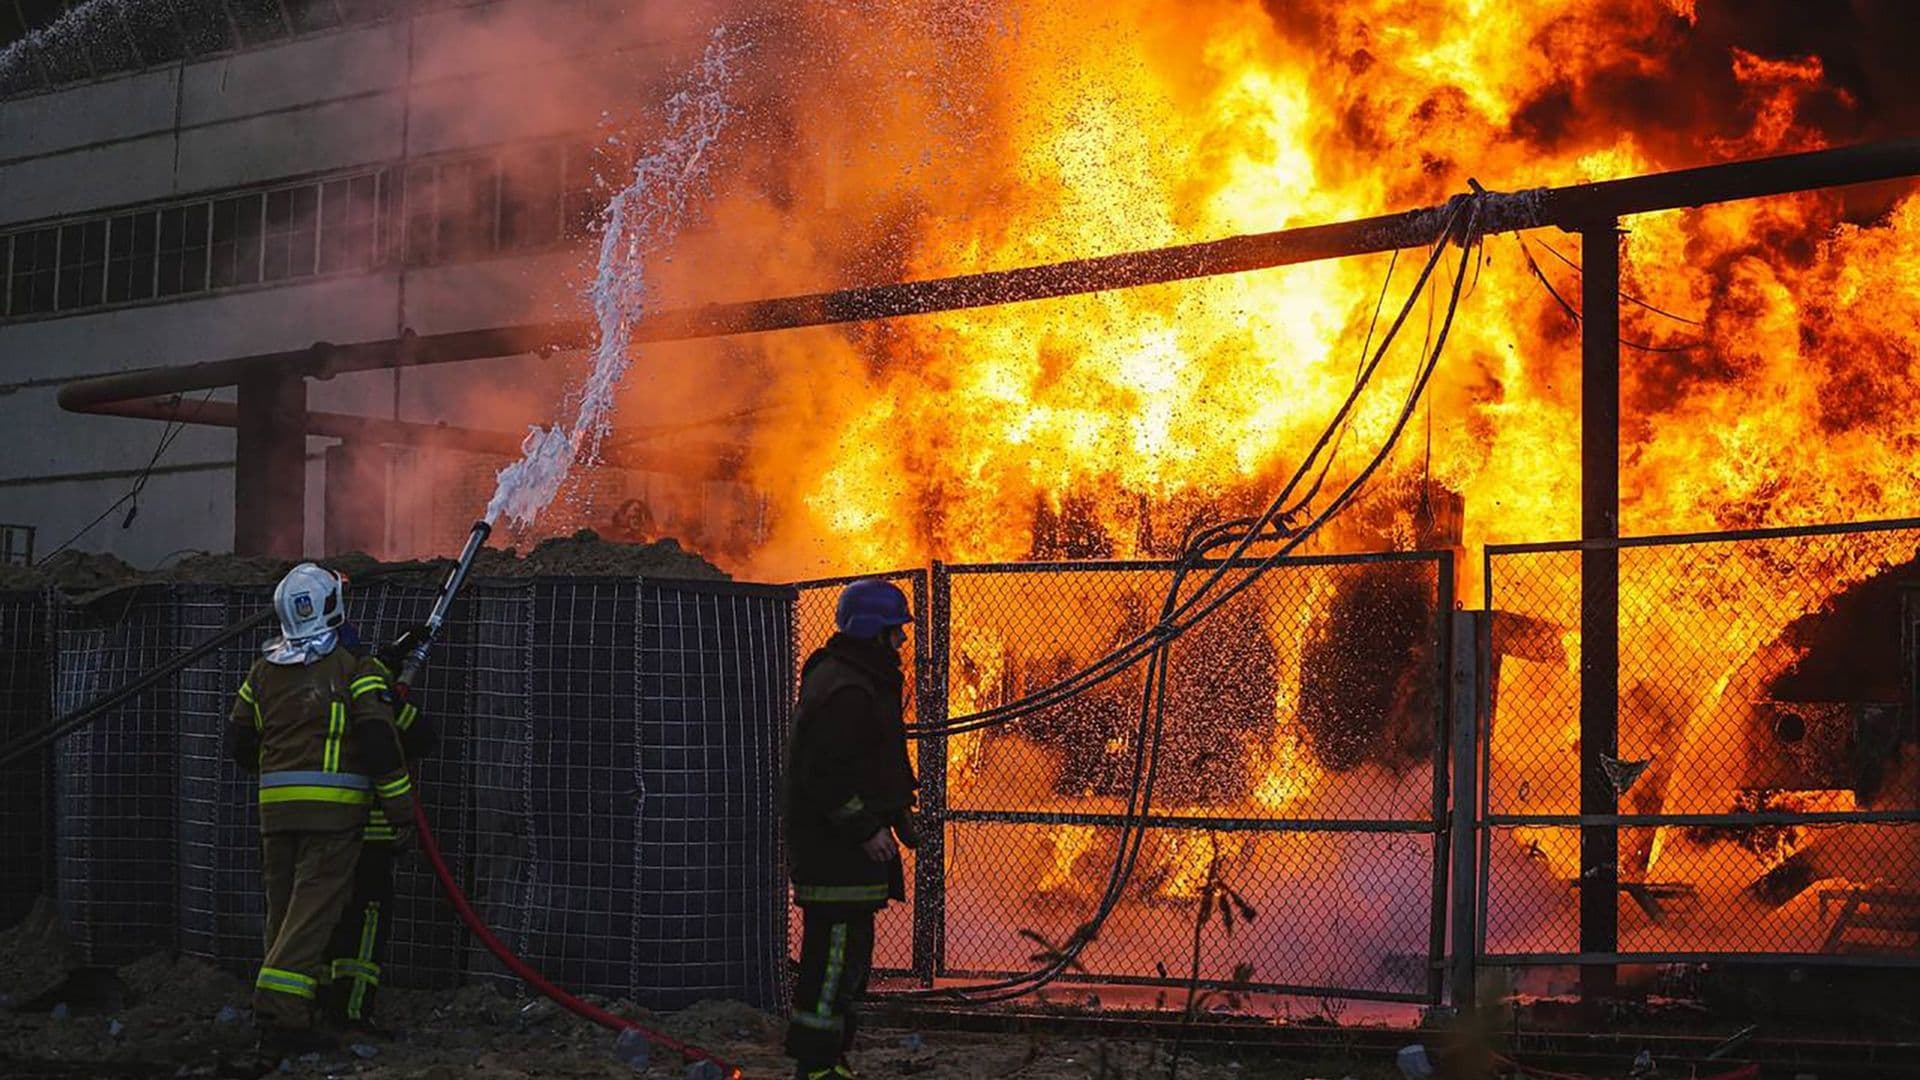 Firefighters work to put out a fire in a thermal power plant damaged by a Russian missile strike in Kyiv